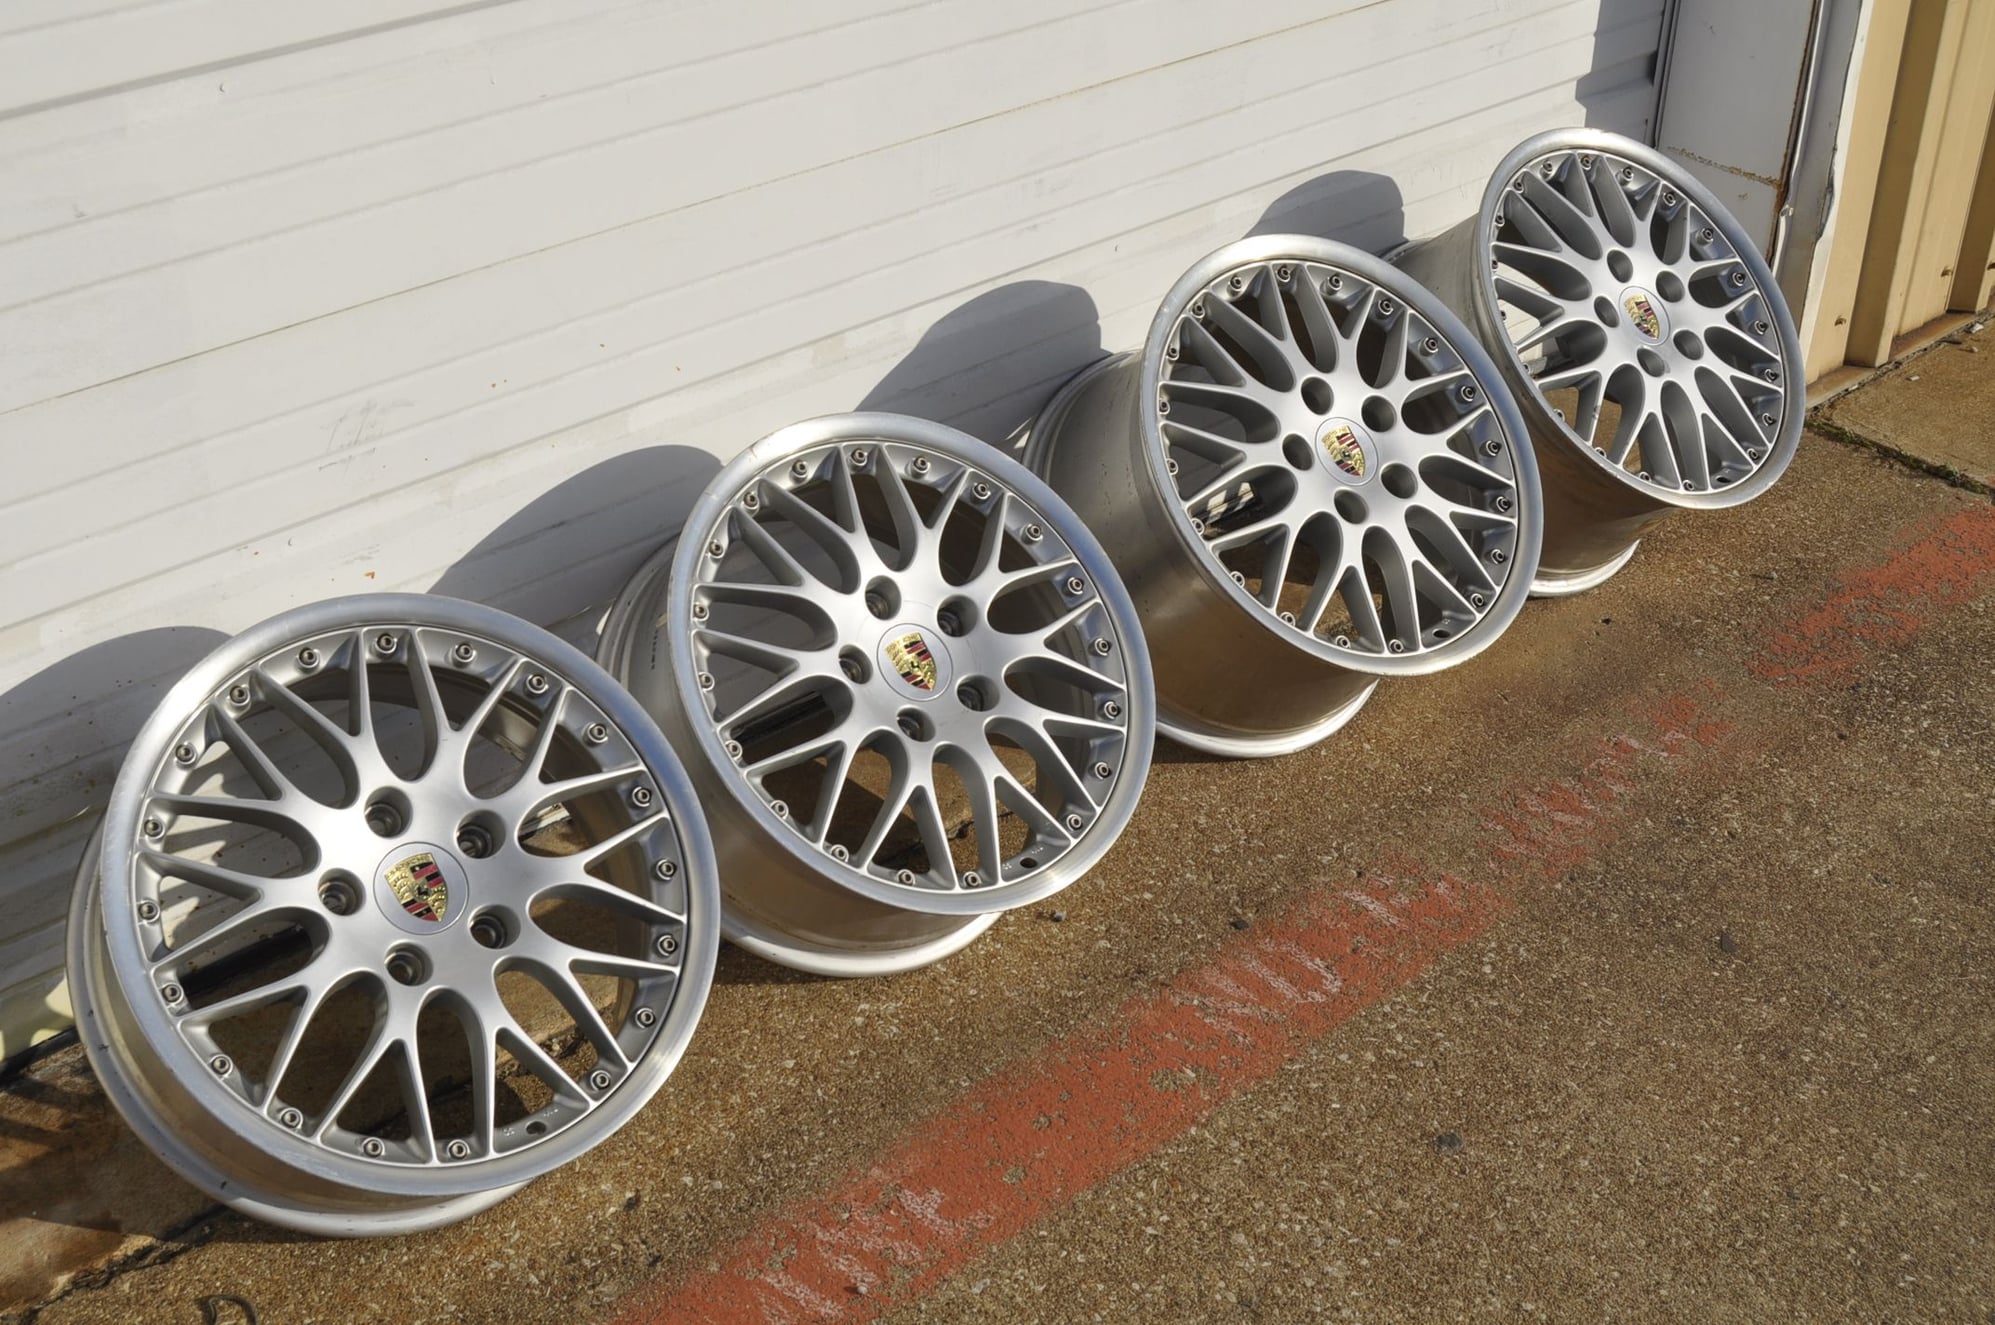 Wheels and Tires/Axles - 18" BBS Sport Classic II wheels, 993 and others - Used - 1987 to 2002 Porsche All Models - Dallas, TX 75229, United States